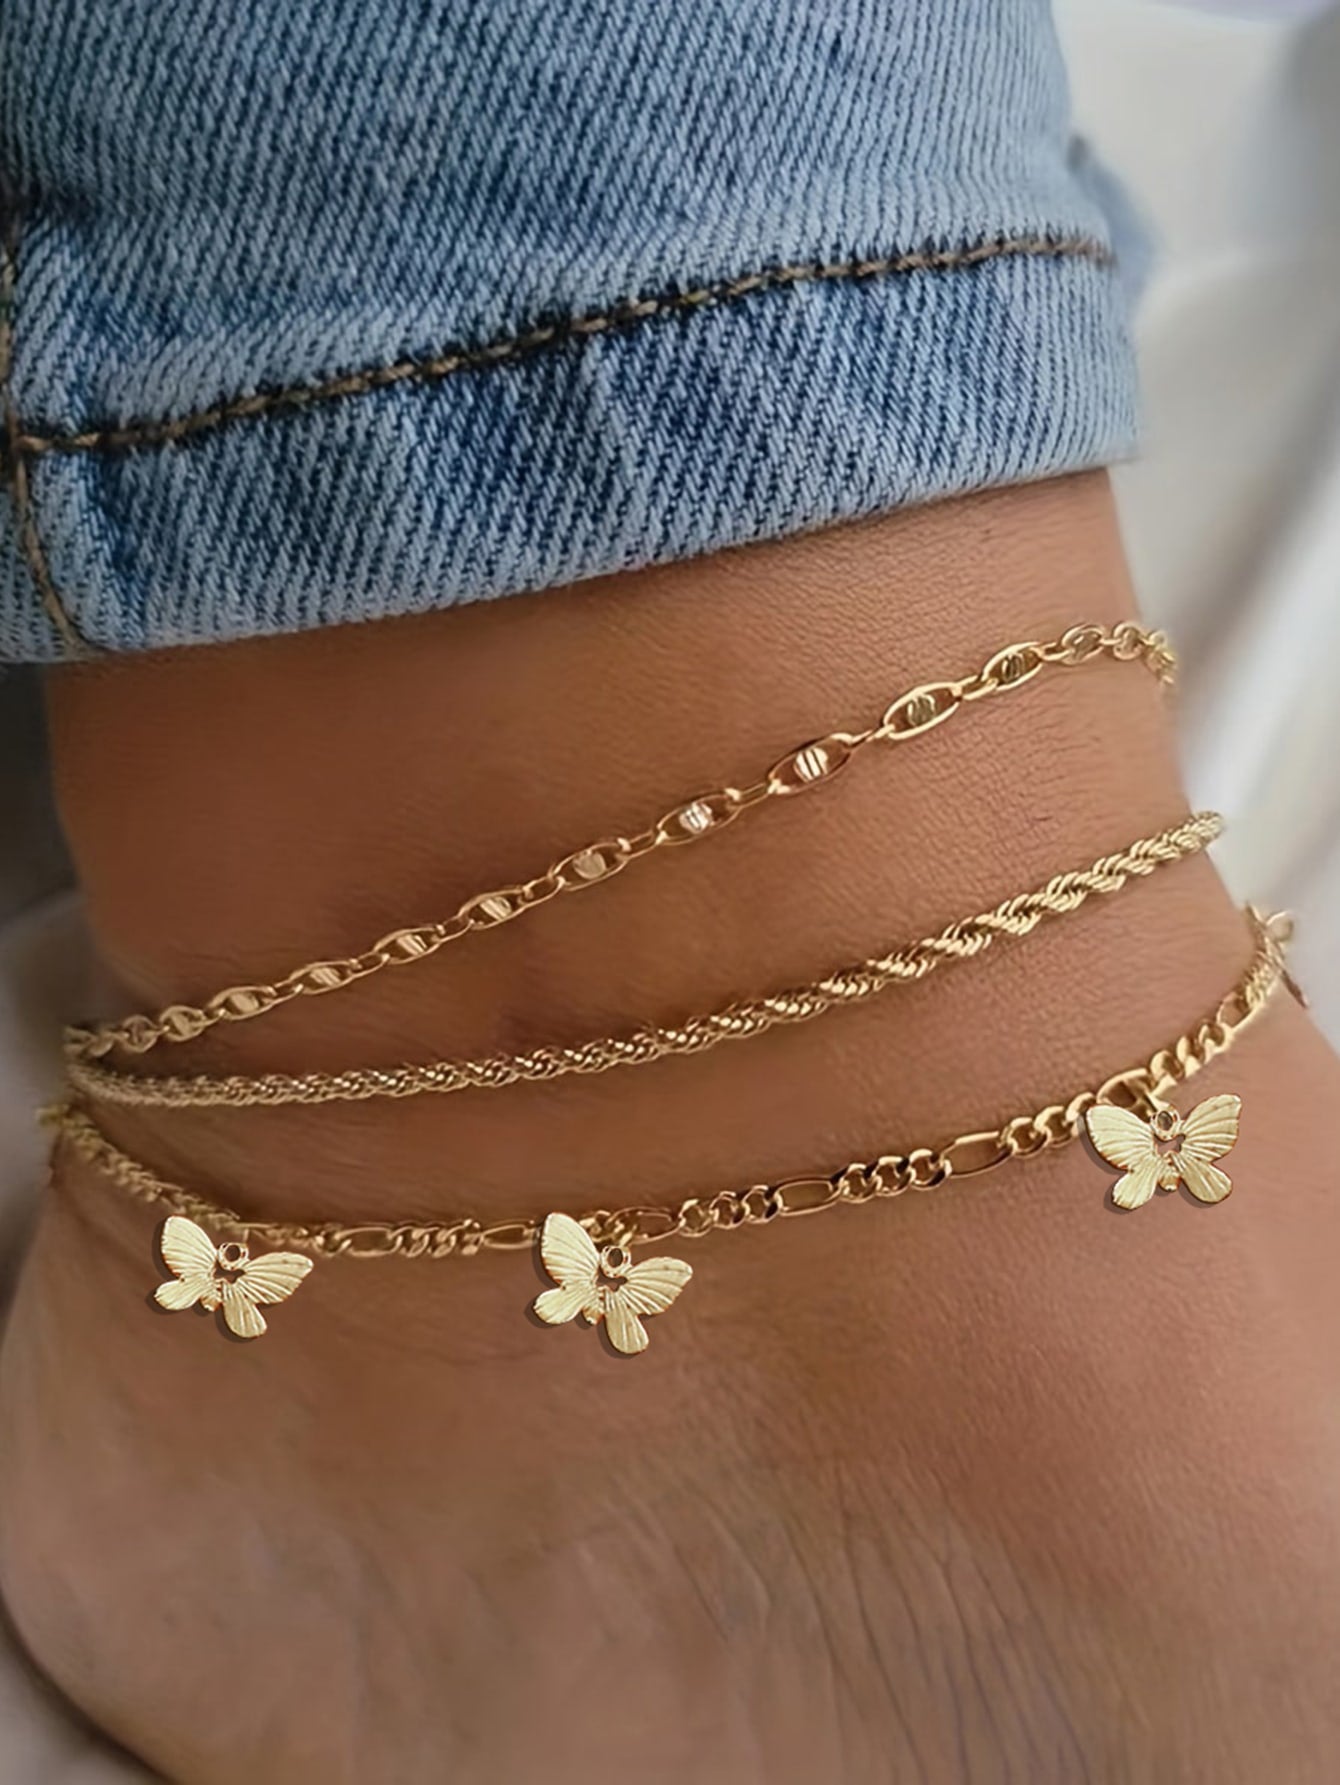 Butterfly Anklet Bracelet 3 Layer Chains